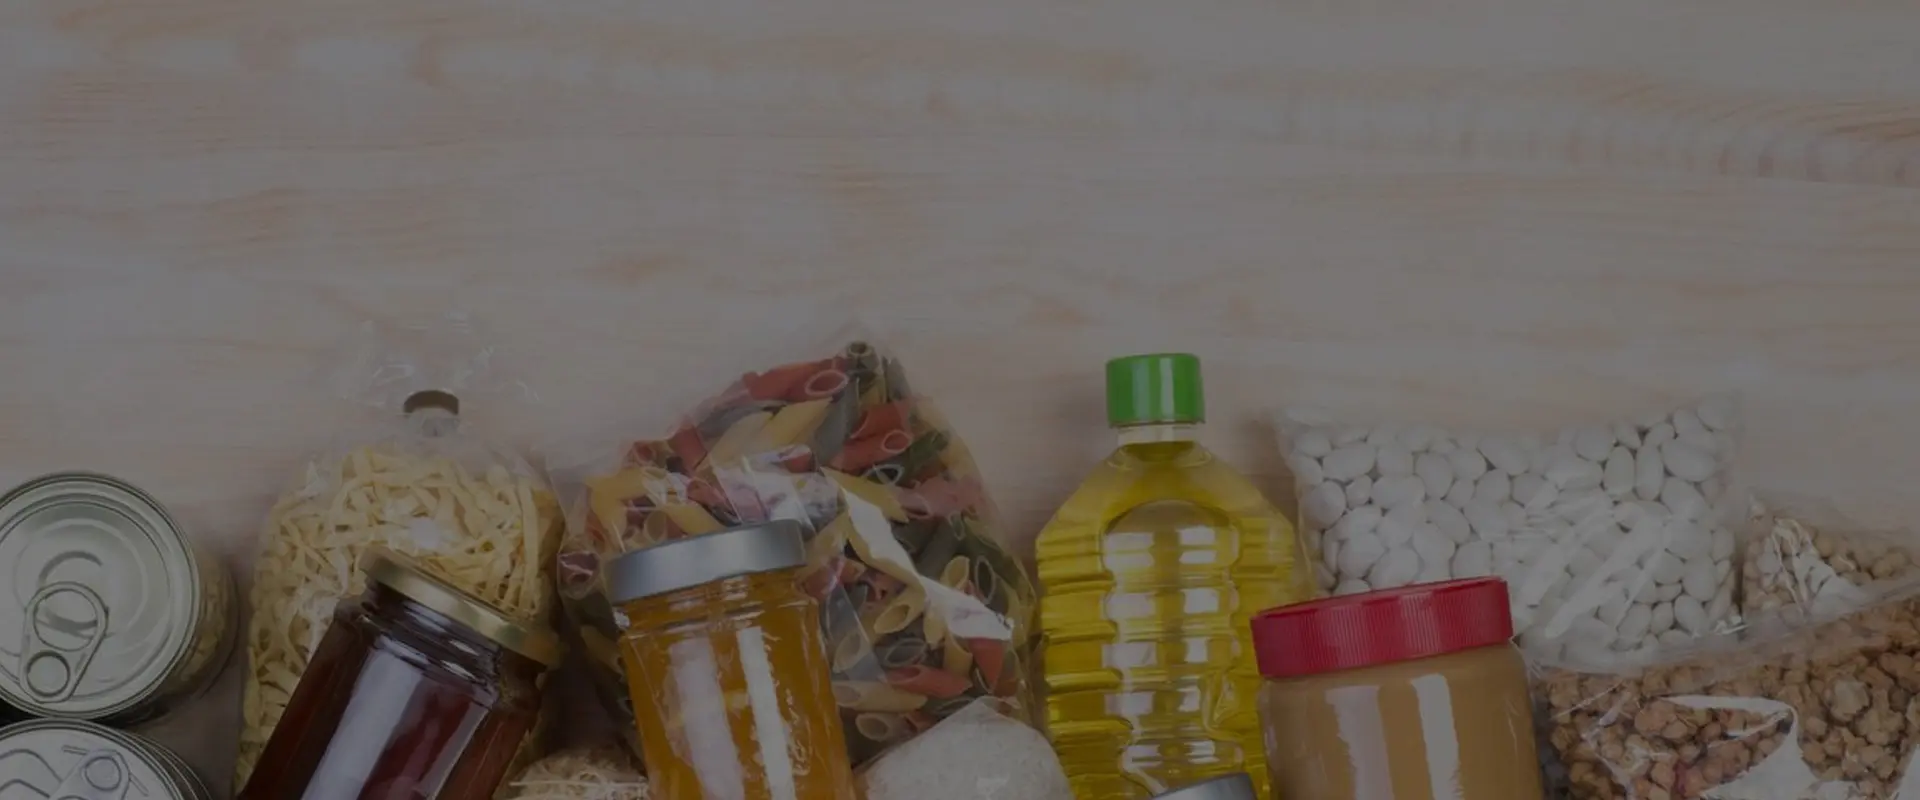 A close up of some food and bottles